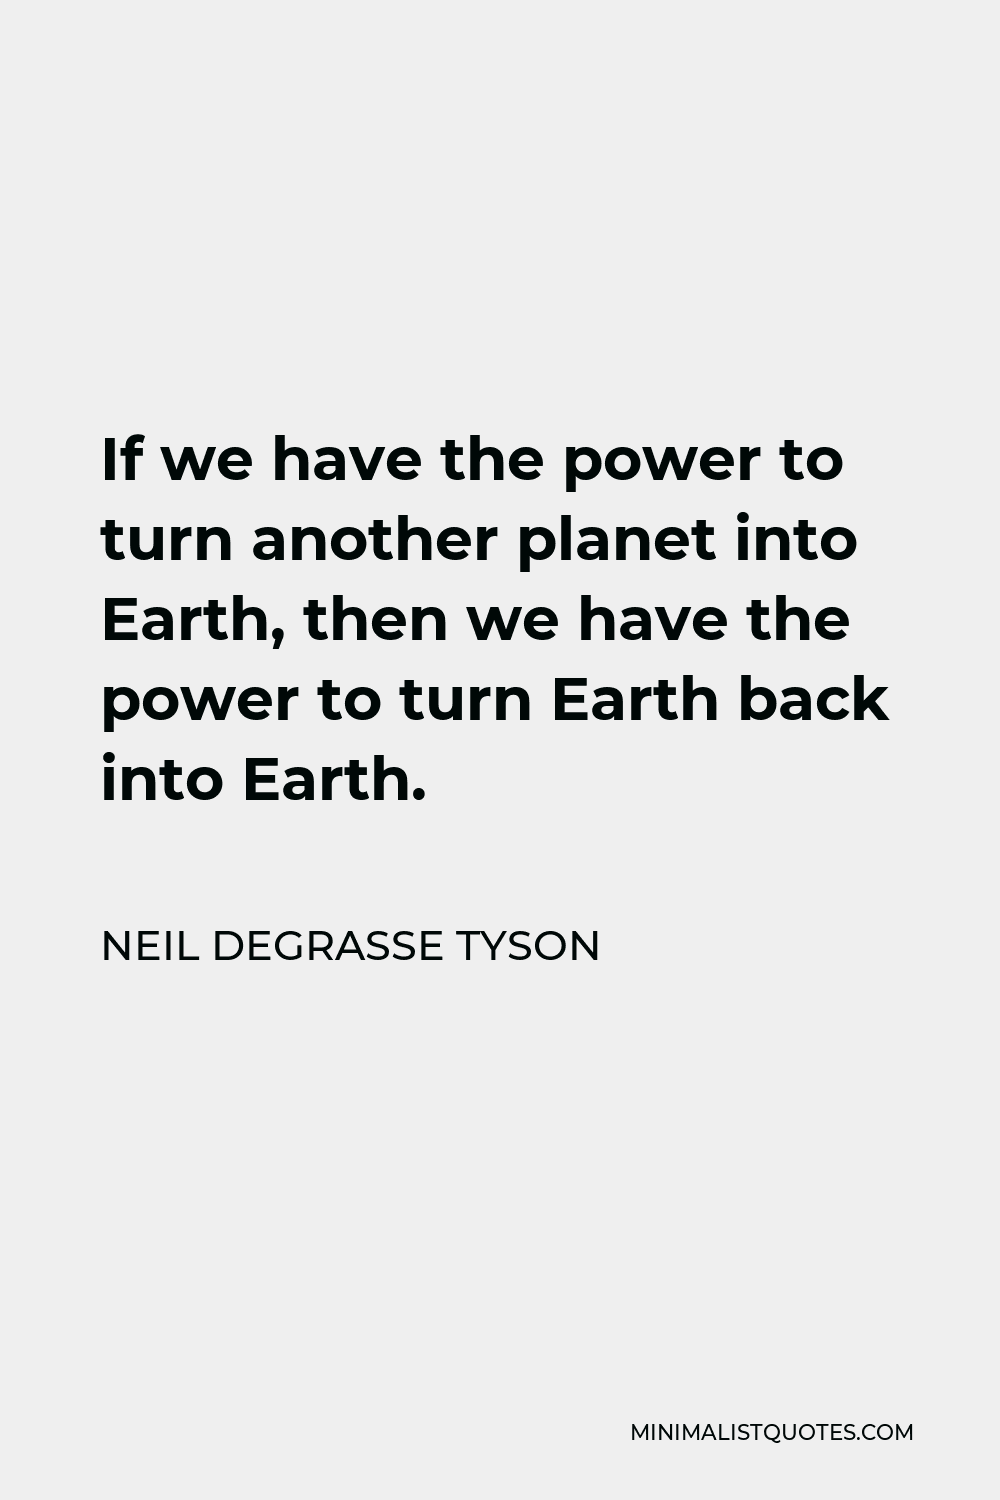 Neil deGrasse Tyson Quote - If we have the power to turn another planet into Earth, then we have the power to turn Earth back into Earth.